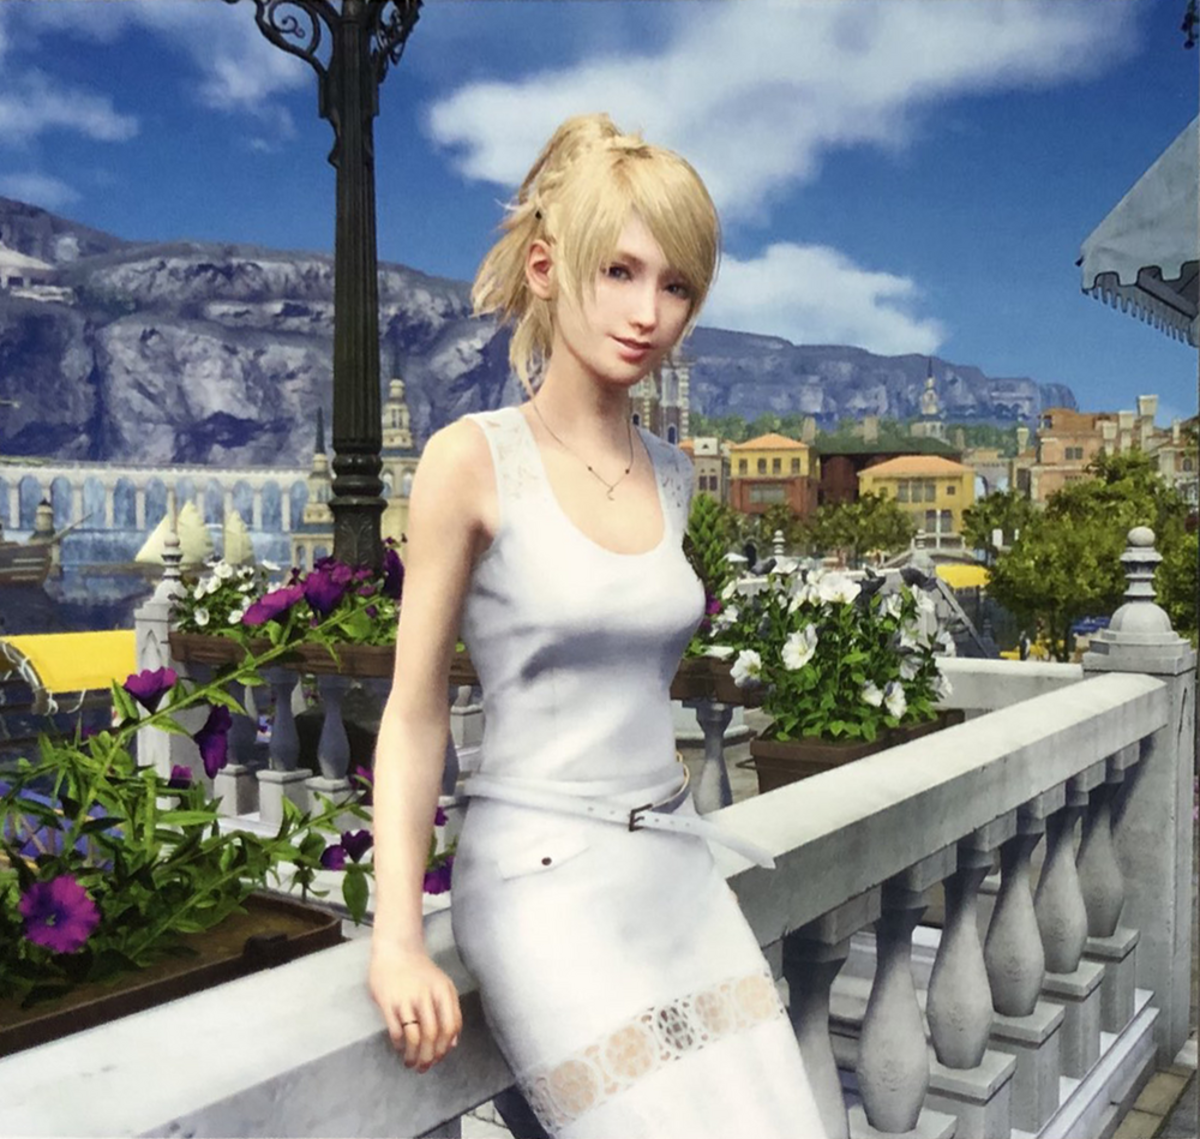 Lunafreya in one of her casual outfits